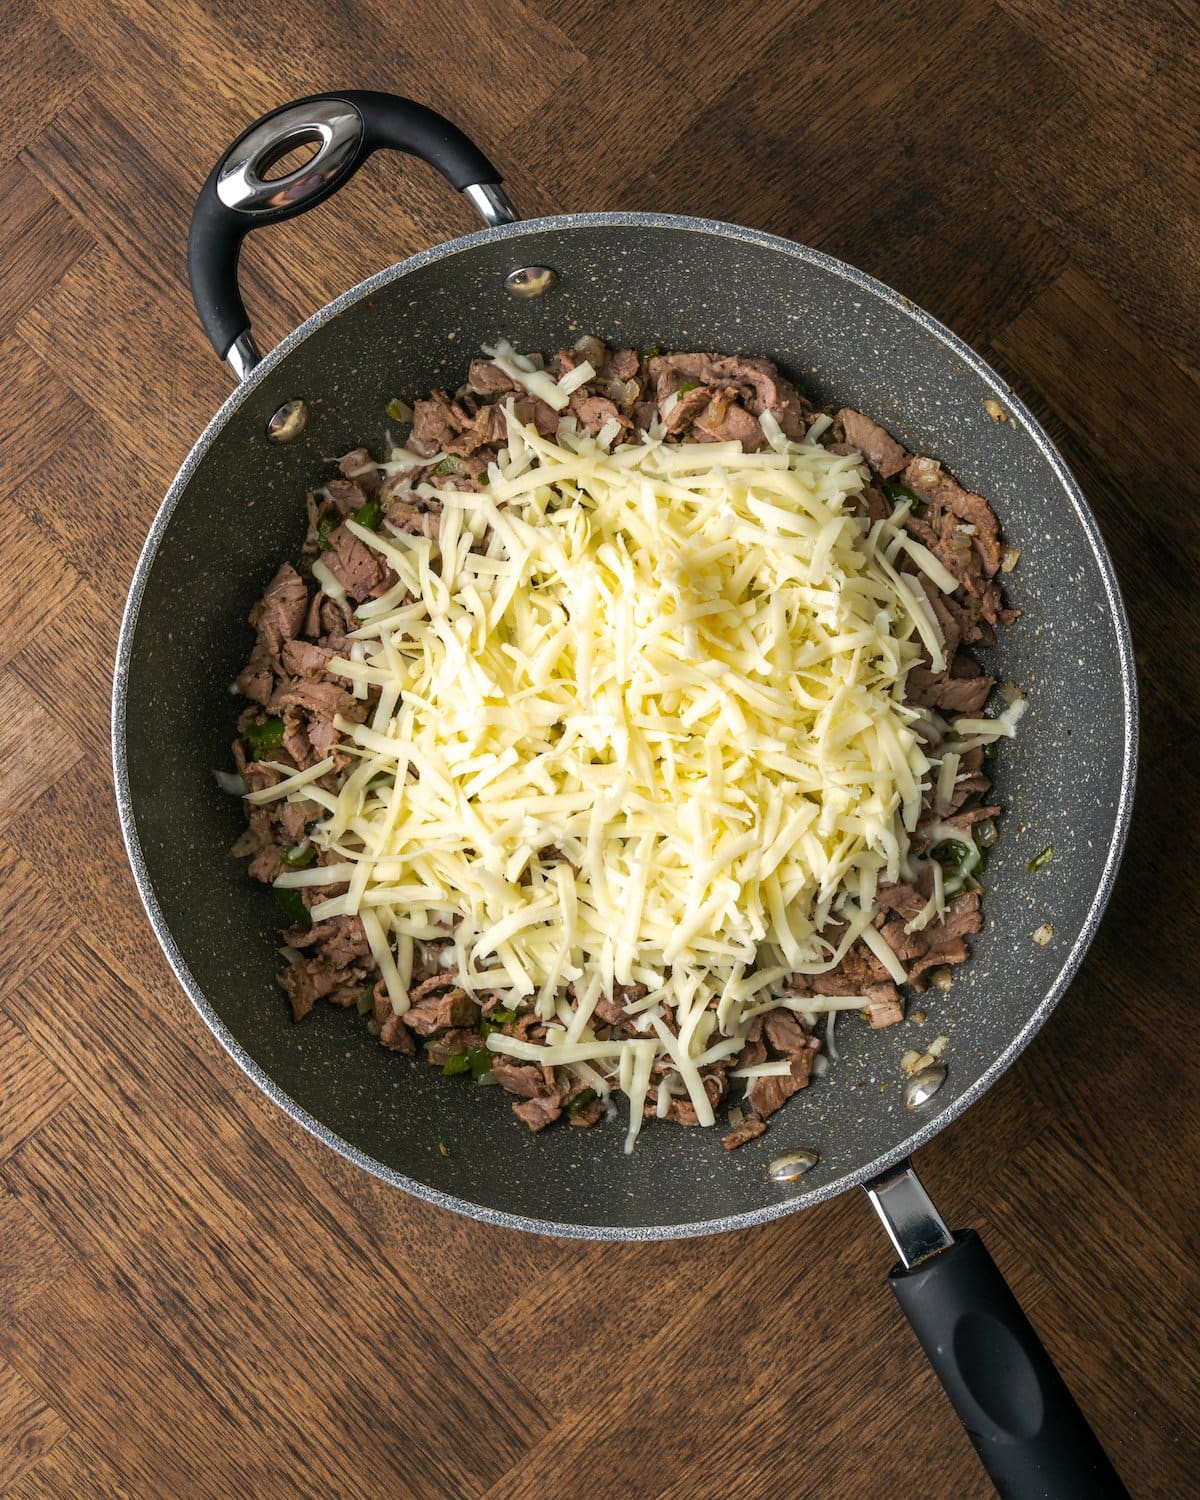 Shredded cheese added to a skillet with Philly cheesesteak mixture.